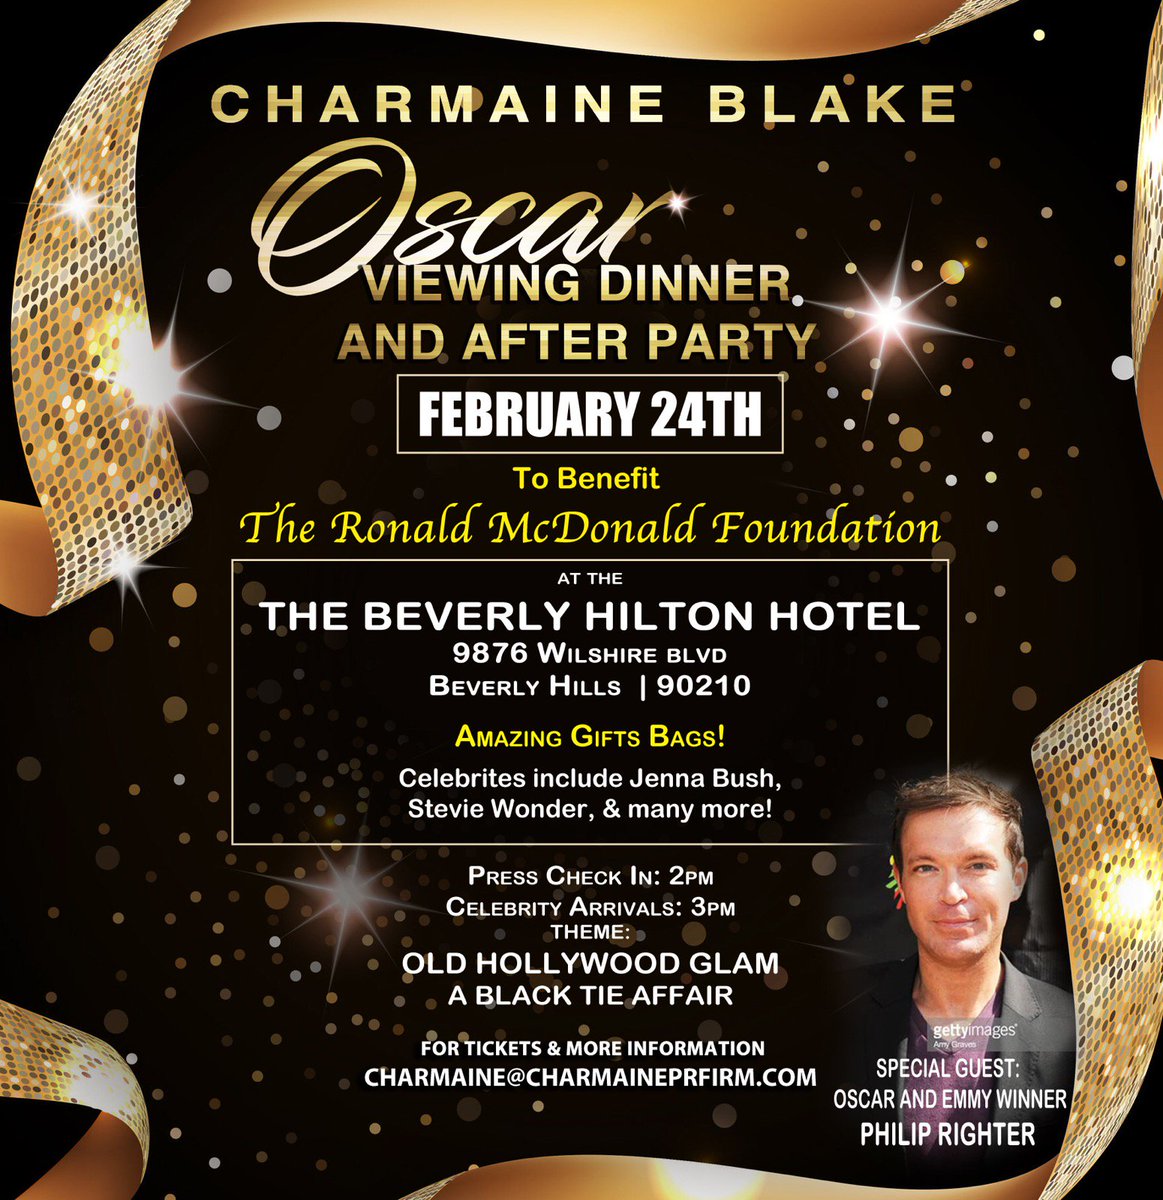 #charmaineblake #oscarViewing #Dinner and #Afterparty #AmazingGiftbags .#celebrities include #StevieWonder #JennaBush #PhilipRighter and many others. #TheBeverlyHiltonHotel #BeverlyHills